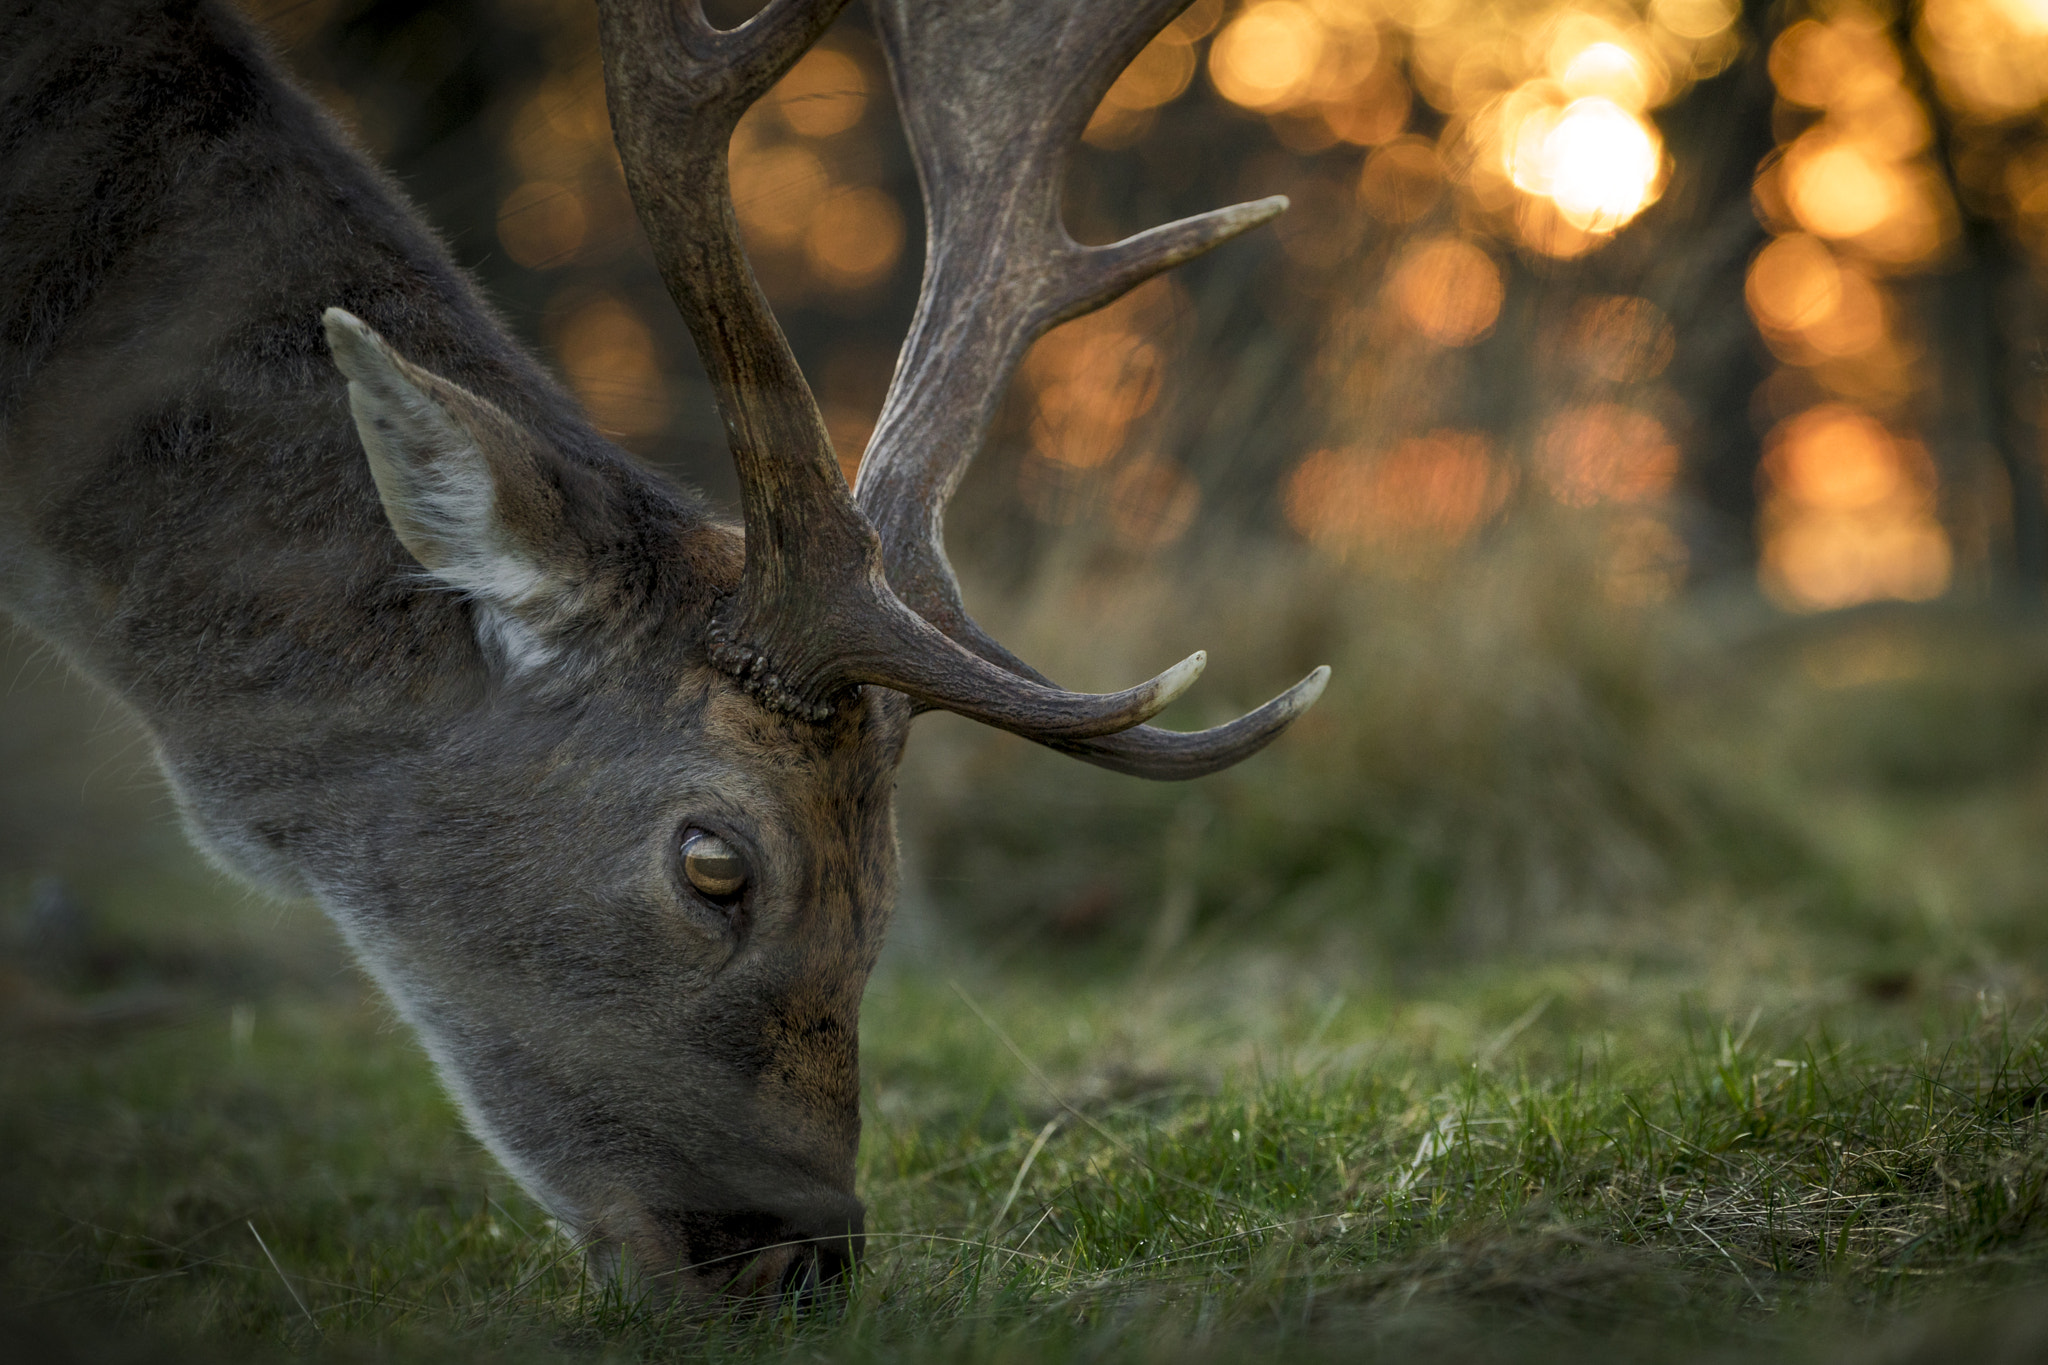 Sony a7 sample photo. Another deer photography